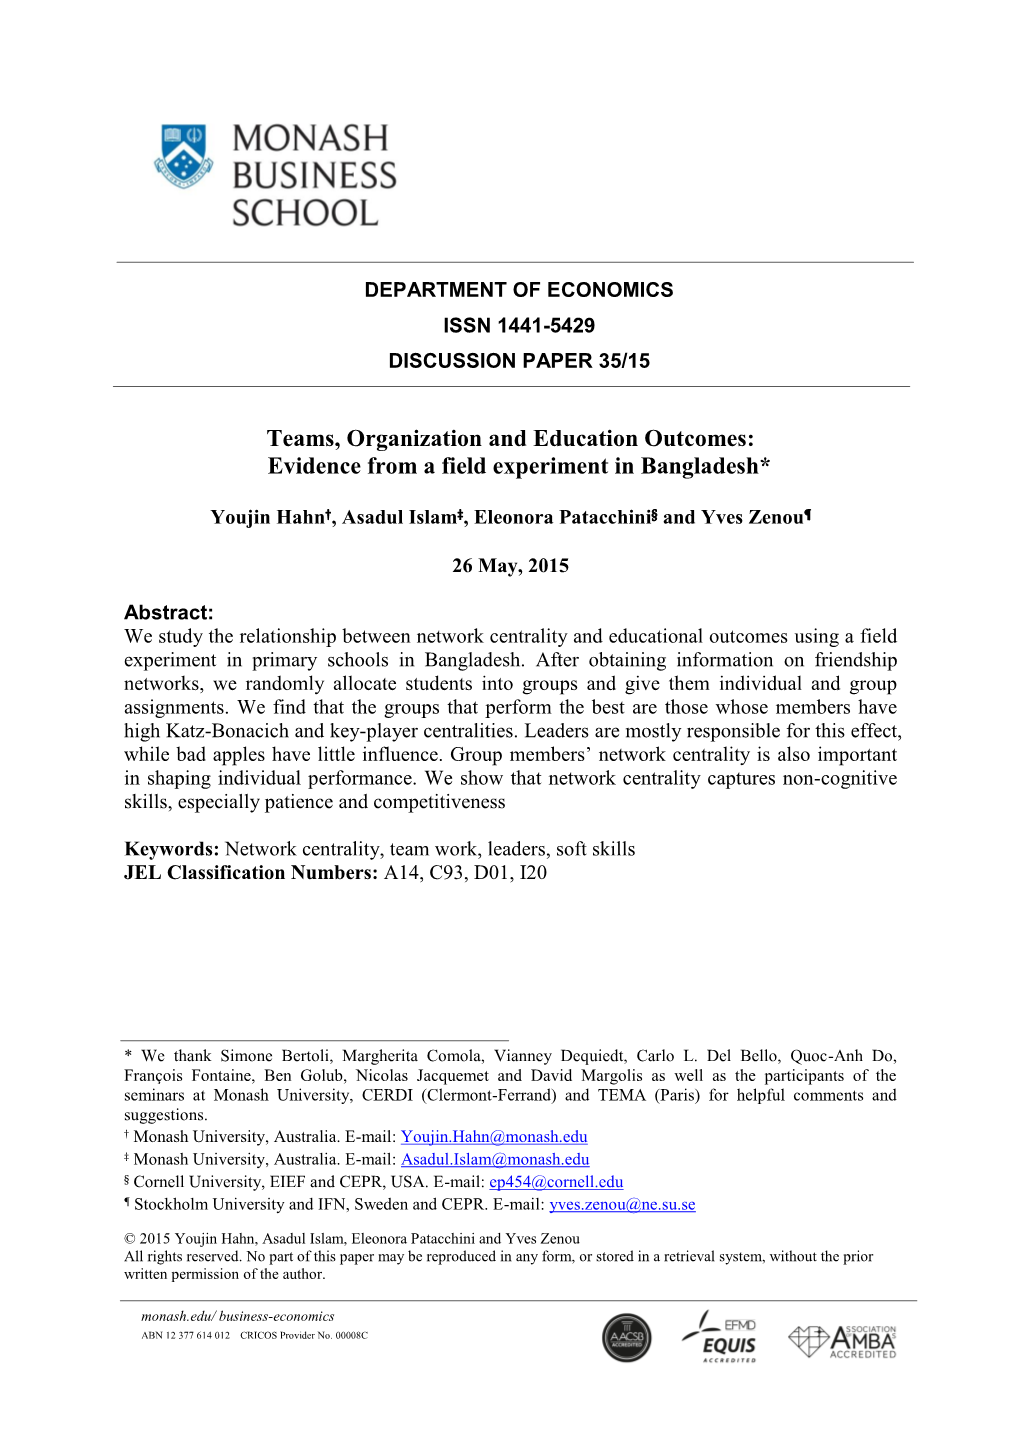 Teams, Organization and Education Outcomes: Evidence from a Field Experiment in Bangladesh*